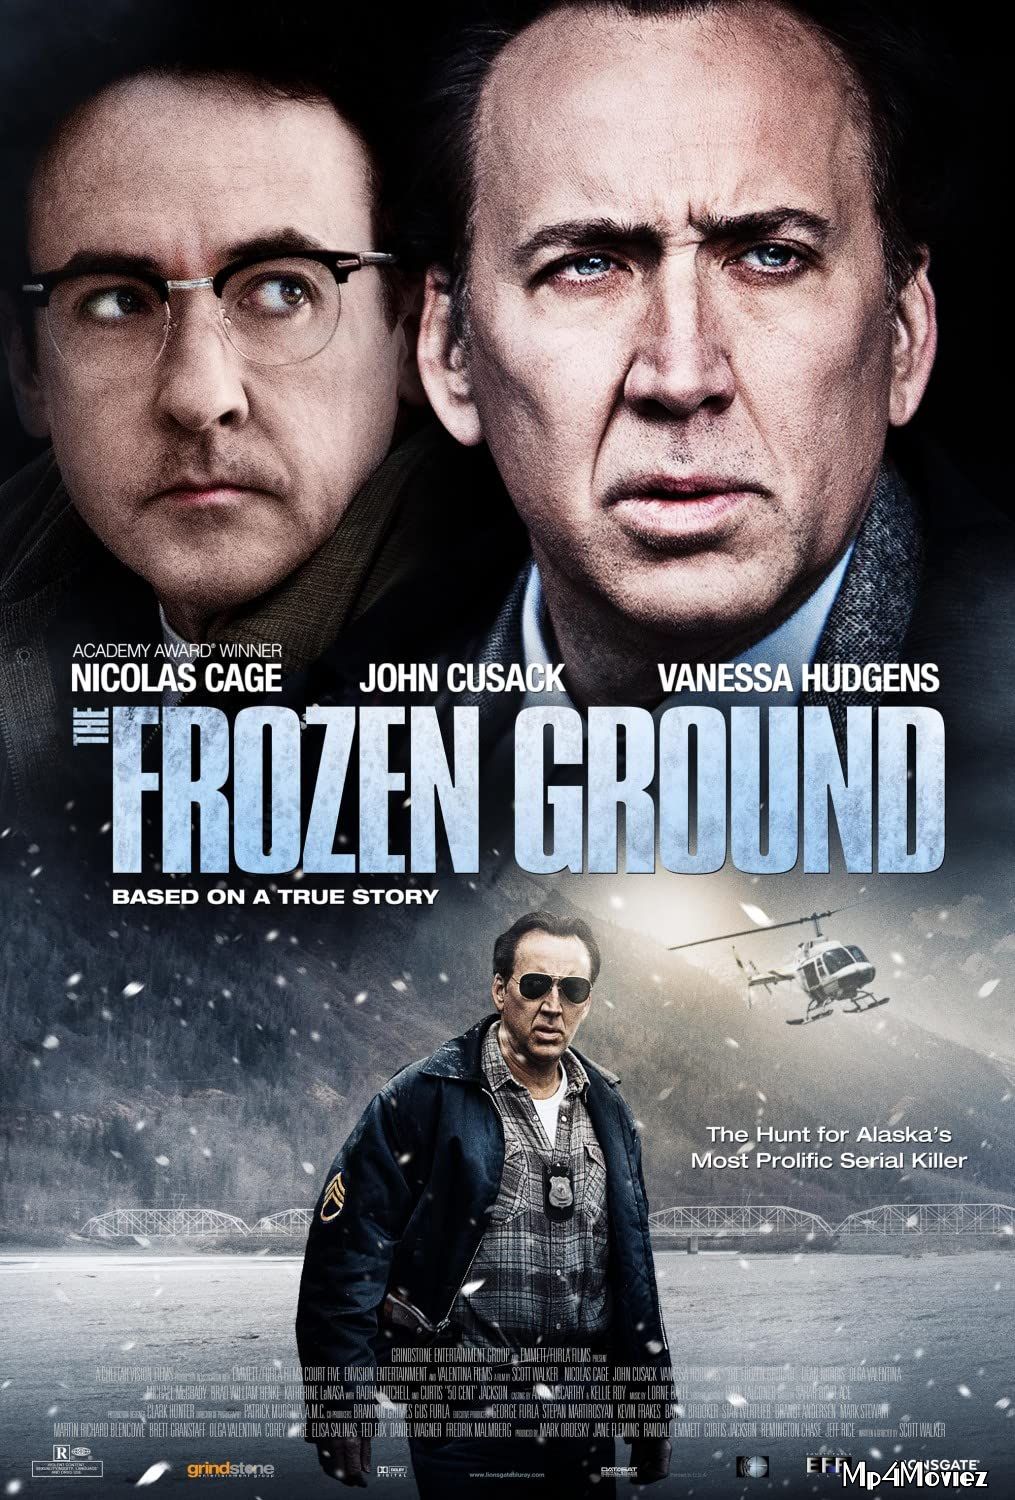 The Frozen Ground (2013) Hindi Dubbed Full Movie download full movie